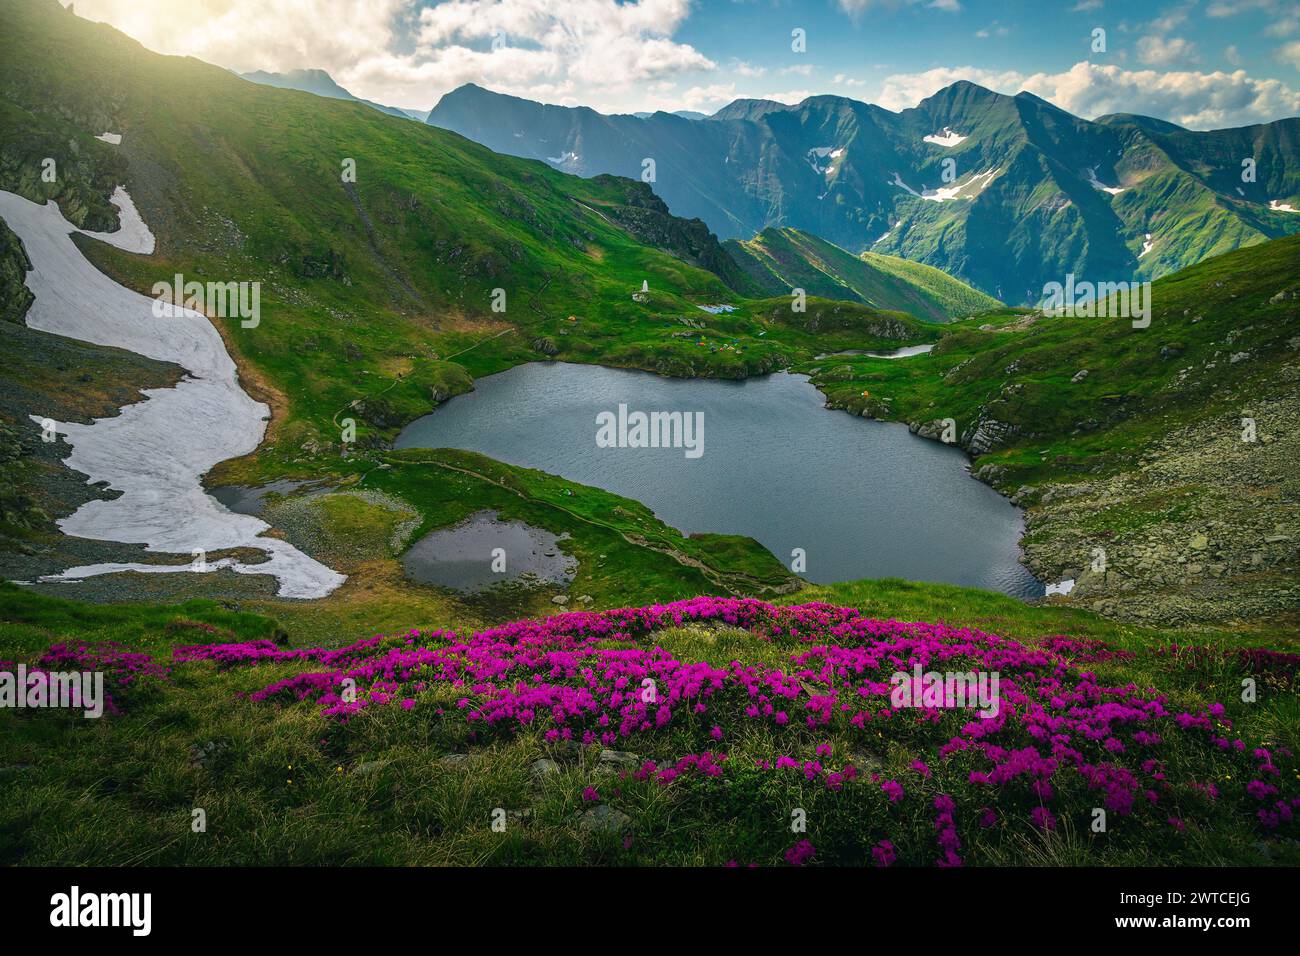 Amazing nature scenery at early summer. Admirable view with lake Capra and blooming fragrant rhododendron flowers on the slope, Fagaras mountains, Car Stock Photo